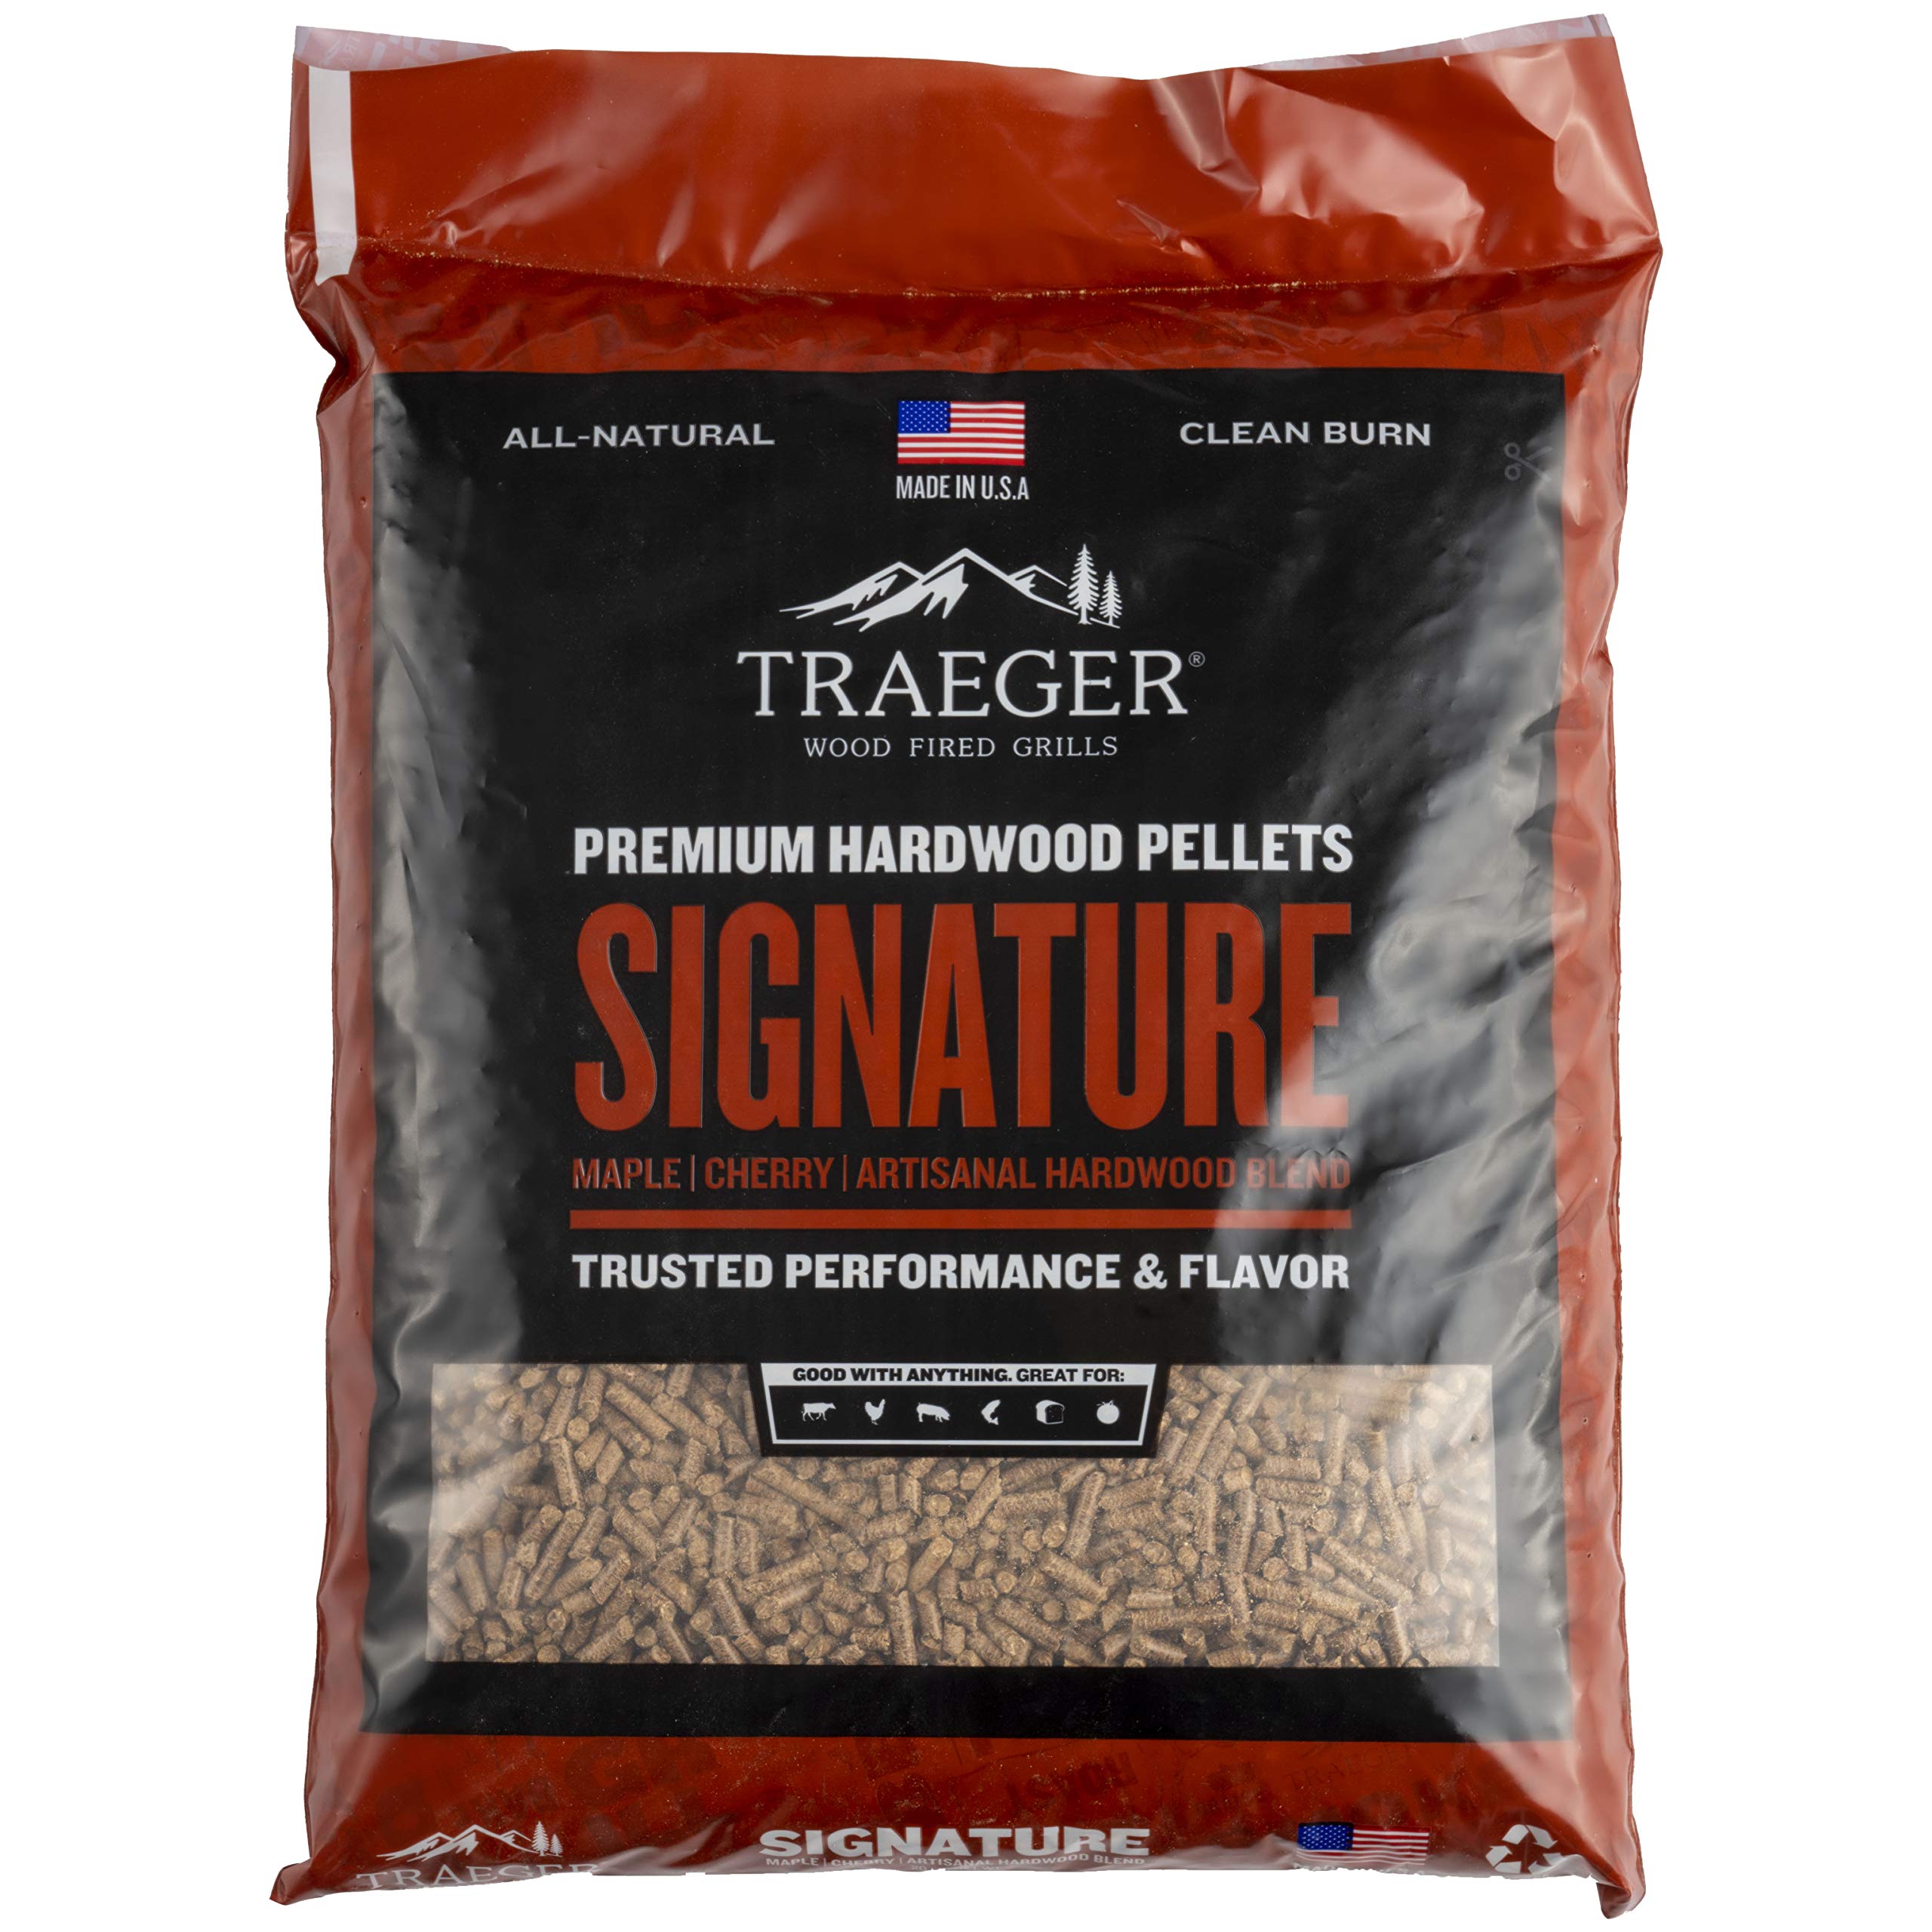 Book Cover Traeger Grills Signature Blend 100% All-Natural Hardwood Pellets for Grill, Smoke, Bake, Roast, Braise and BBQ, 20 lb. Bag